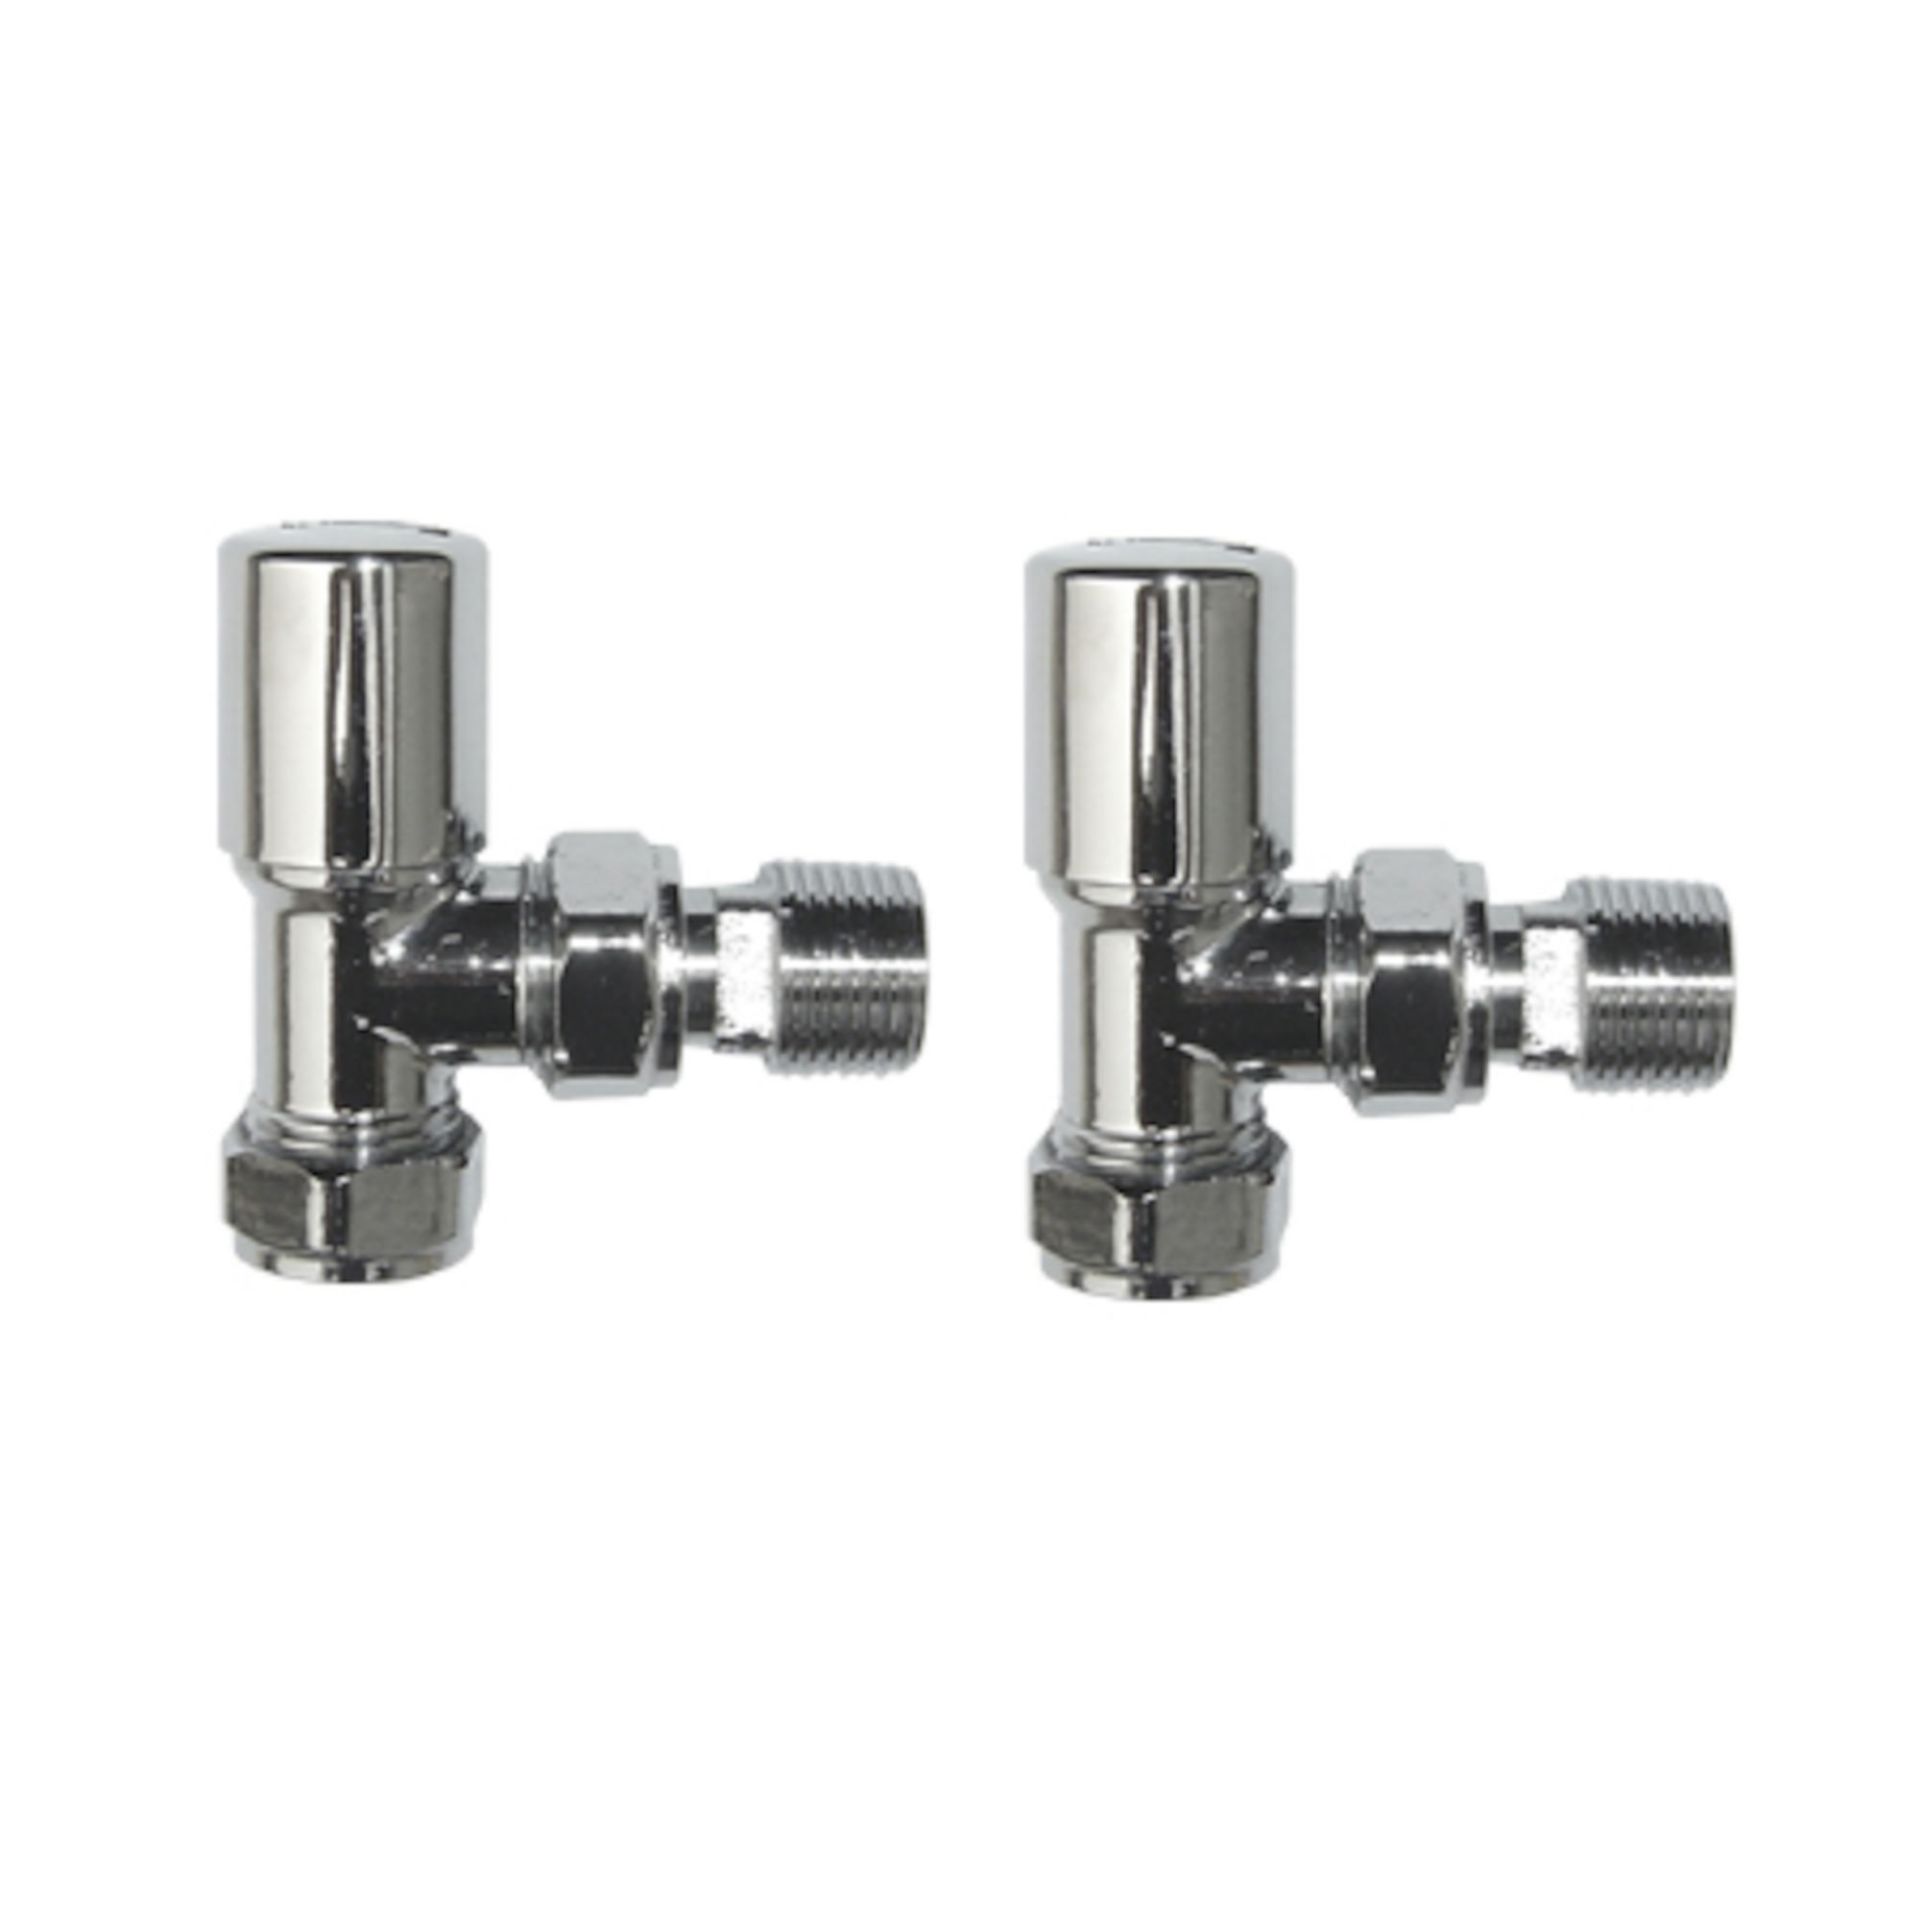 (TT184) Standard 15mm Connection Angled Chrome Radiator Valves Chrome Plated Solid Brass Angl... - Image 2 of 3